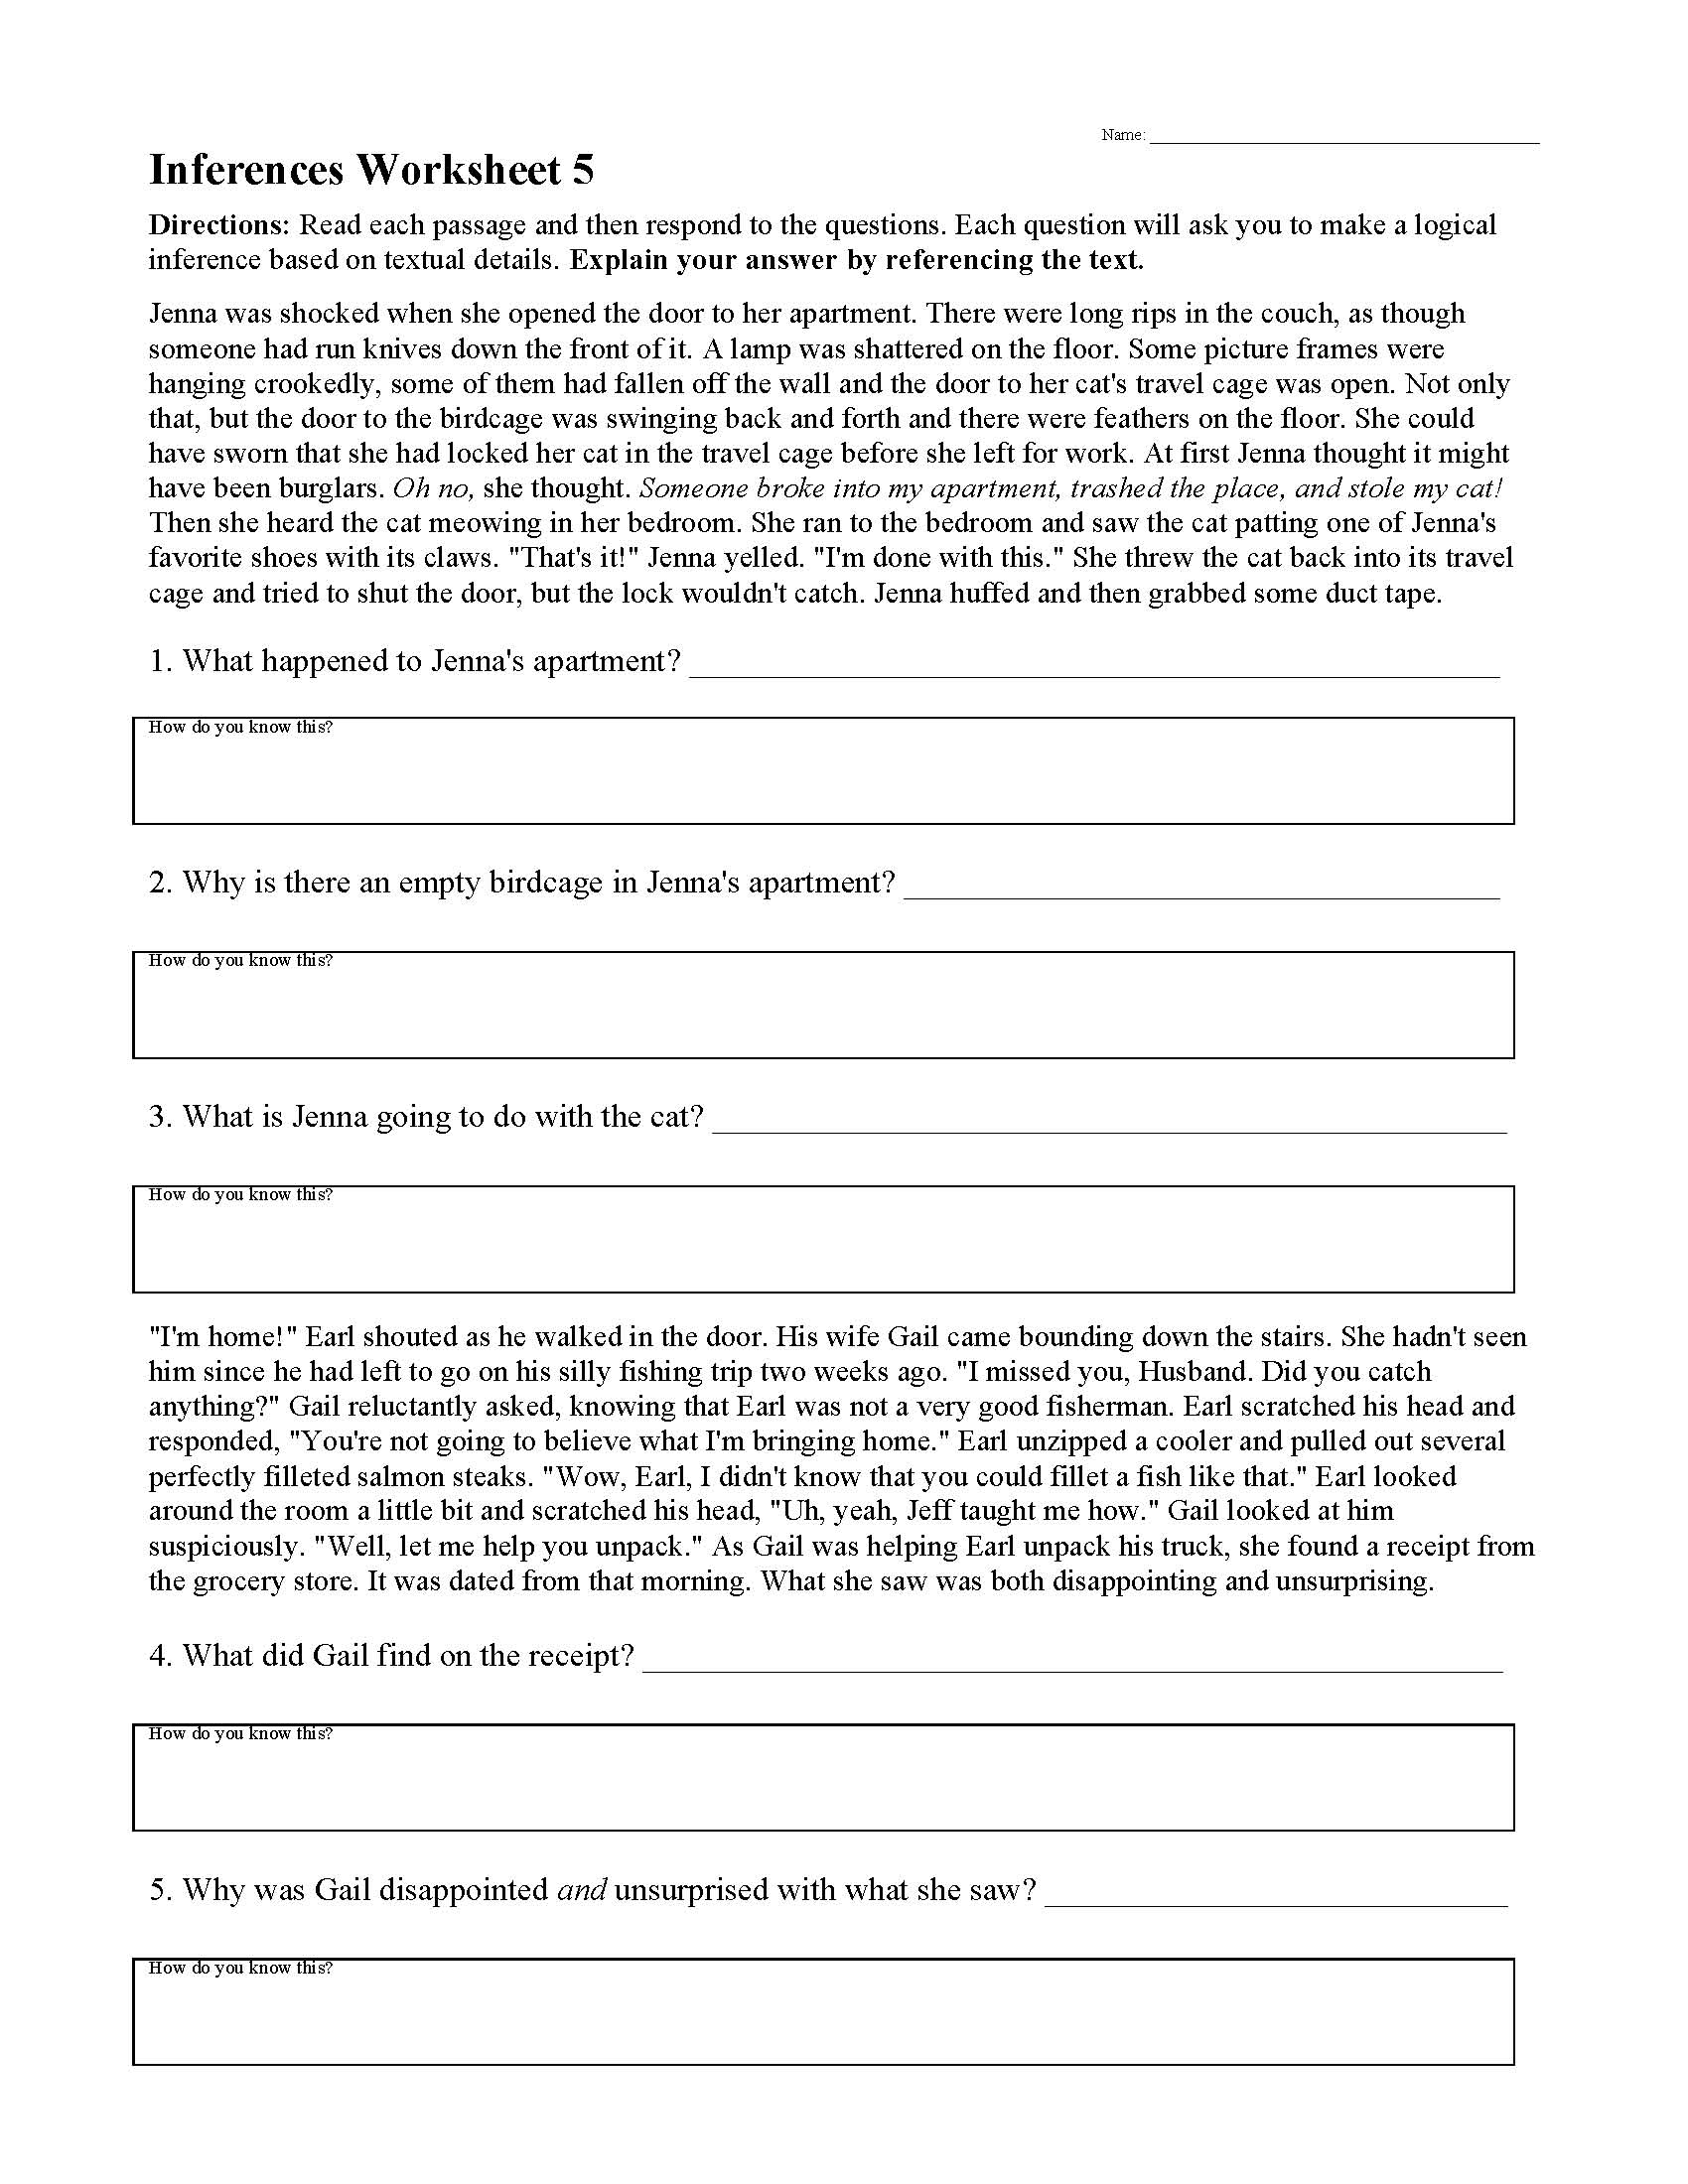 inferences-worksheet-5-reading-activity